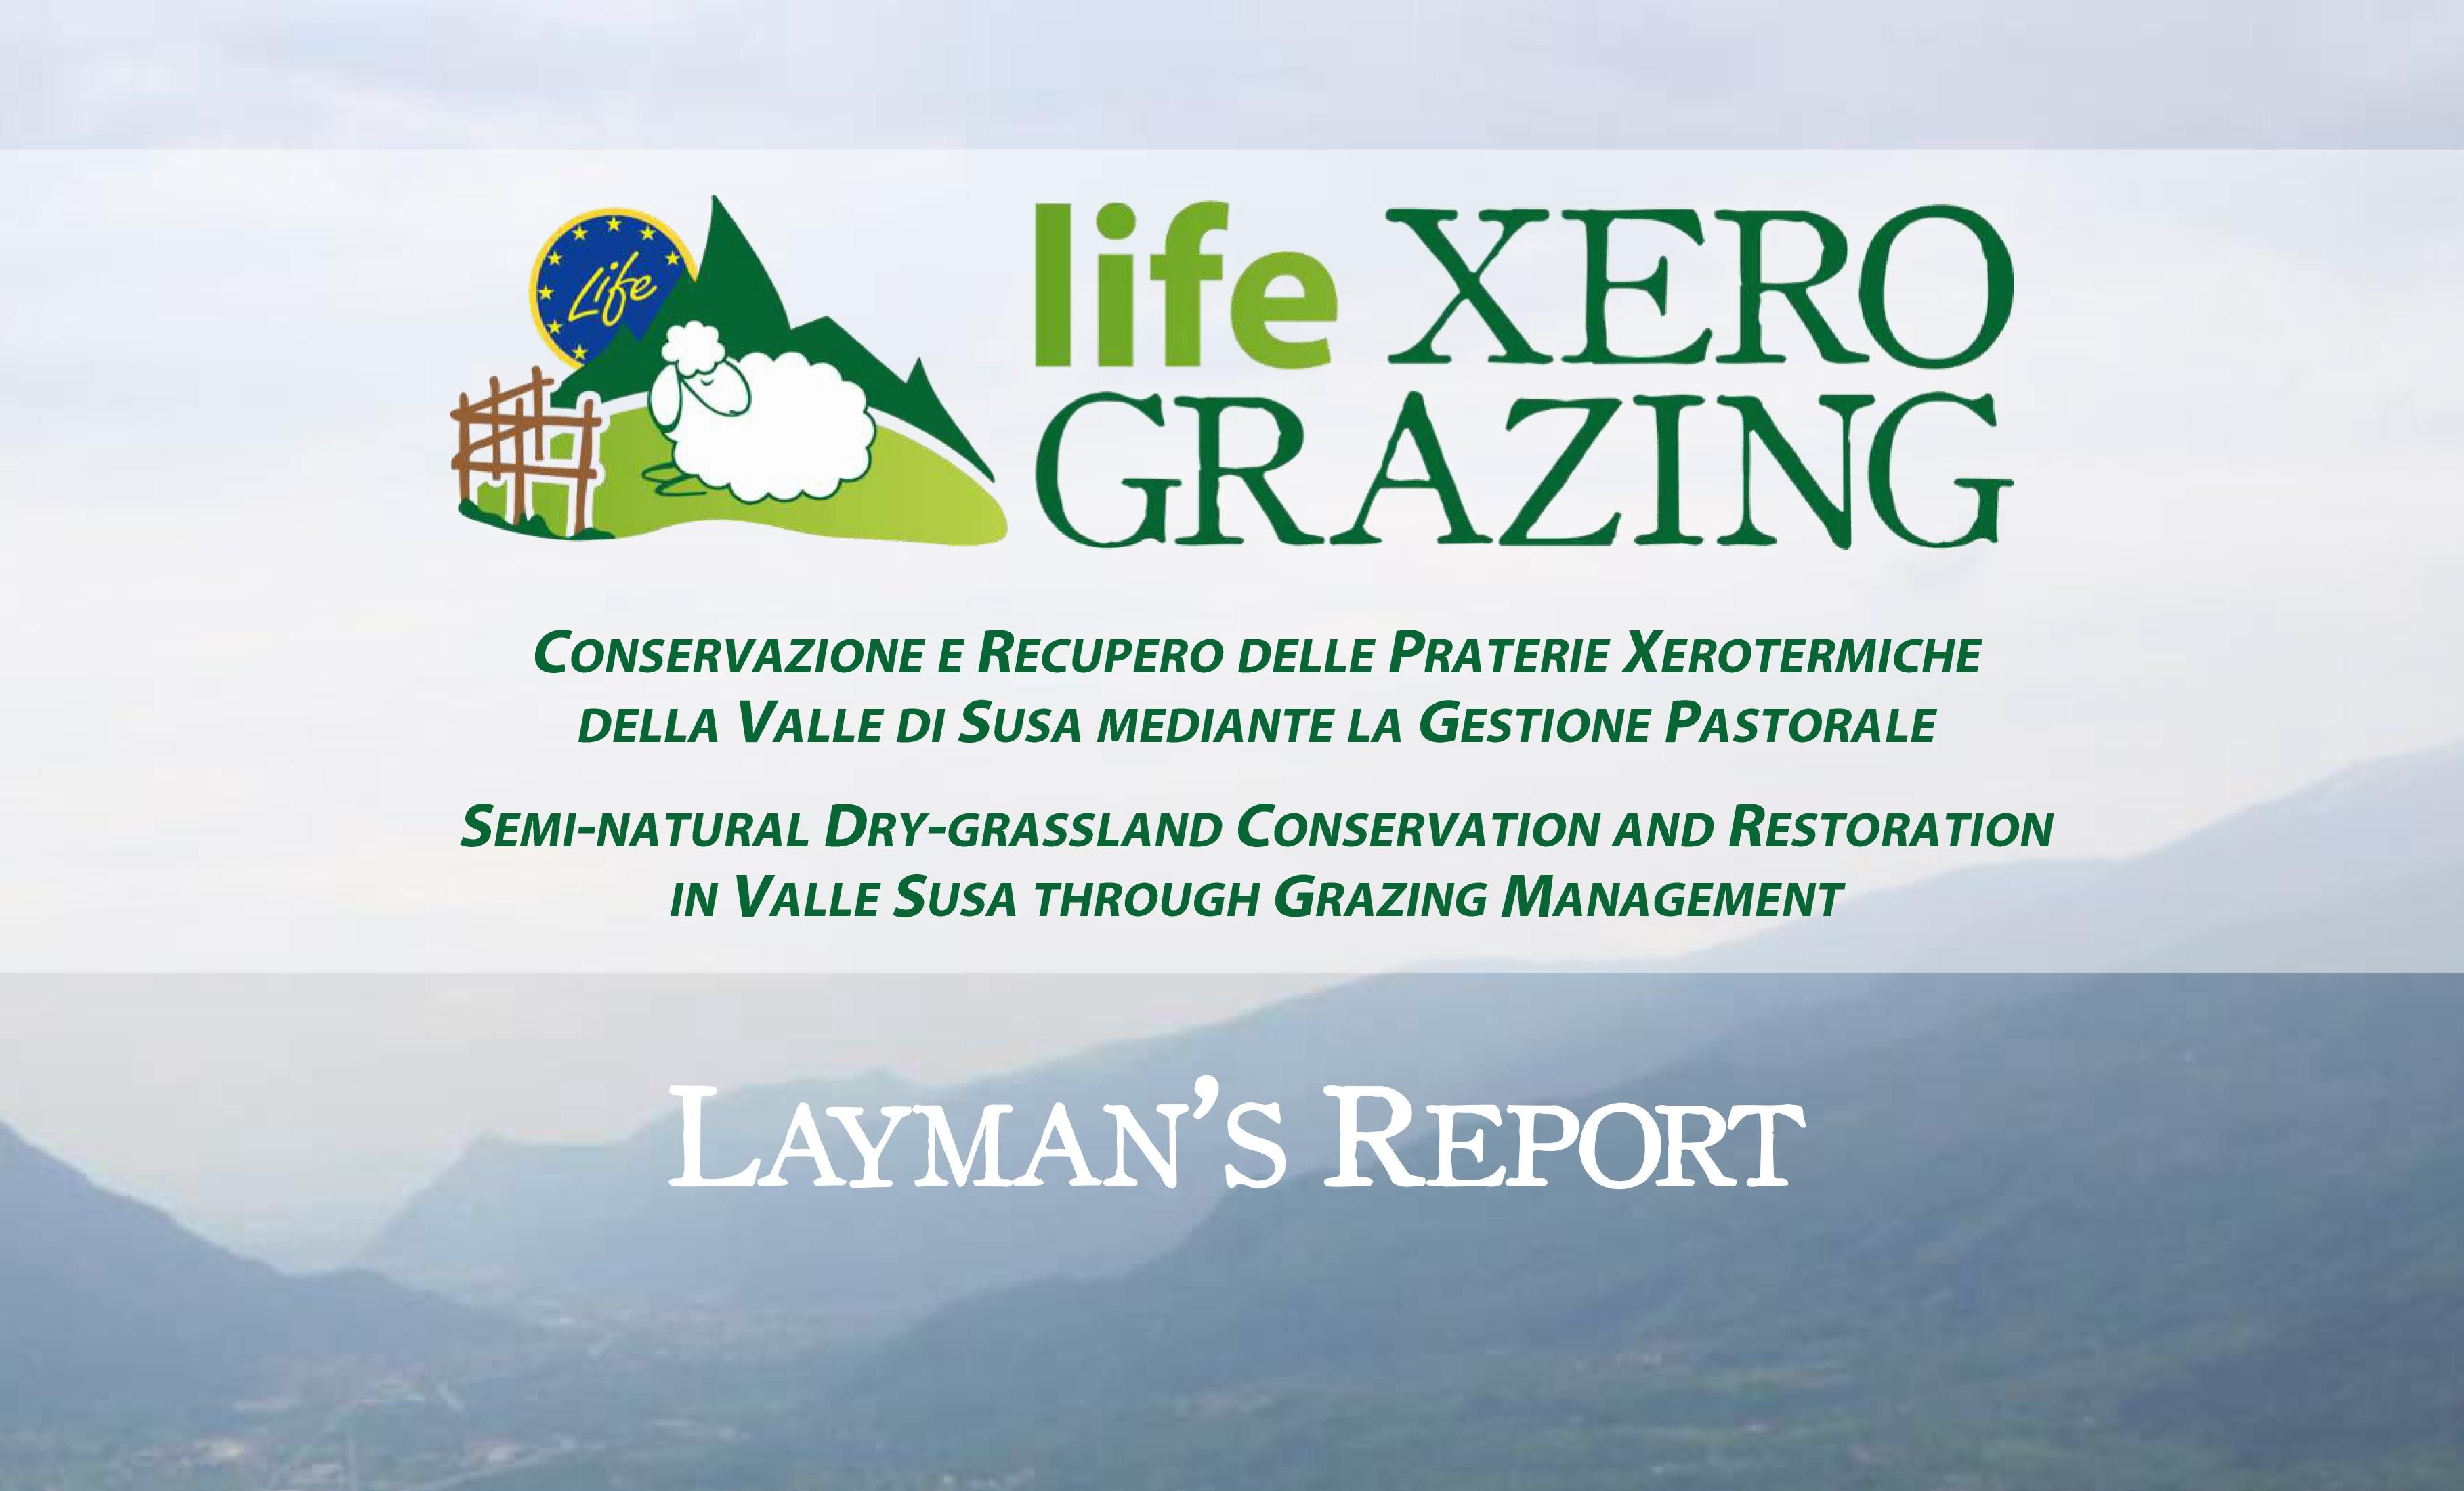 DOWNLOAD THE LAYMAN'S REPORT OF THE PROJECT